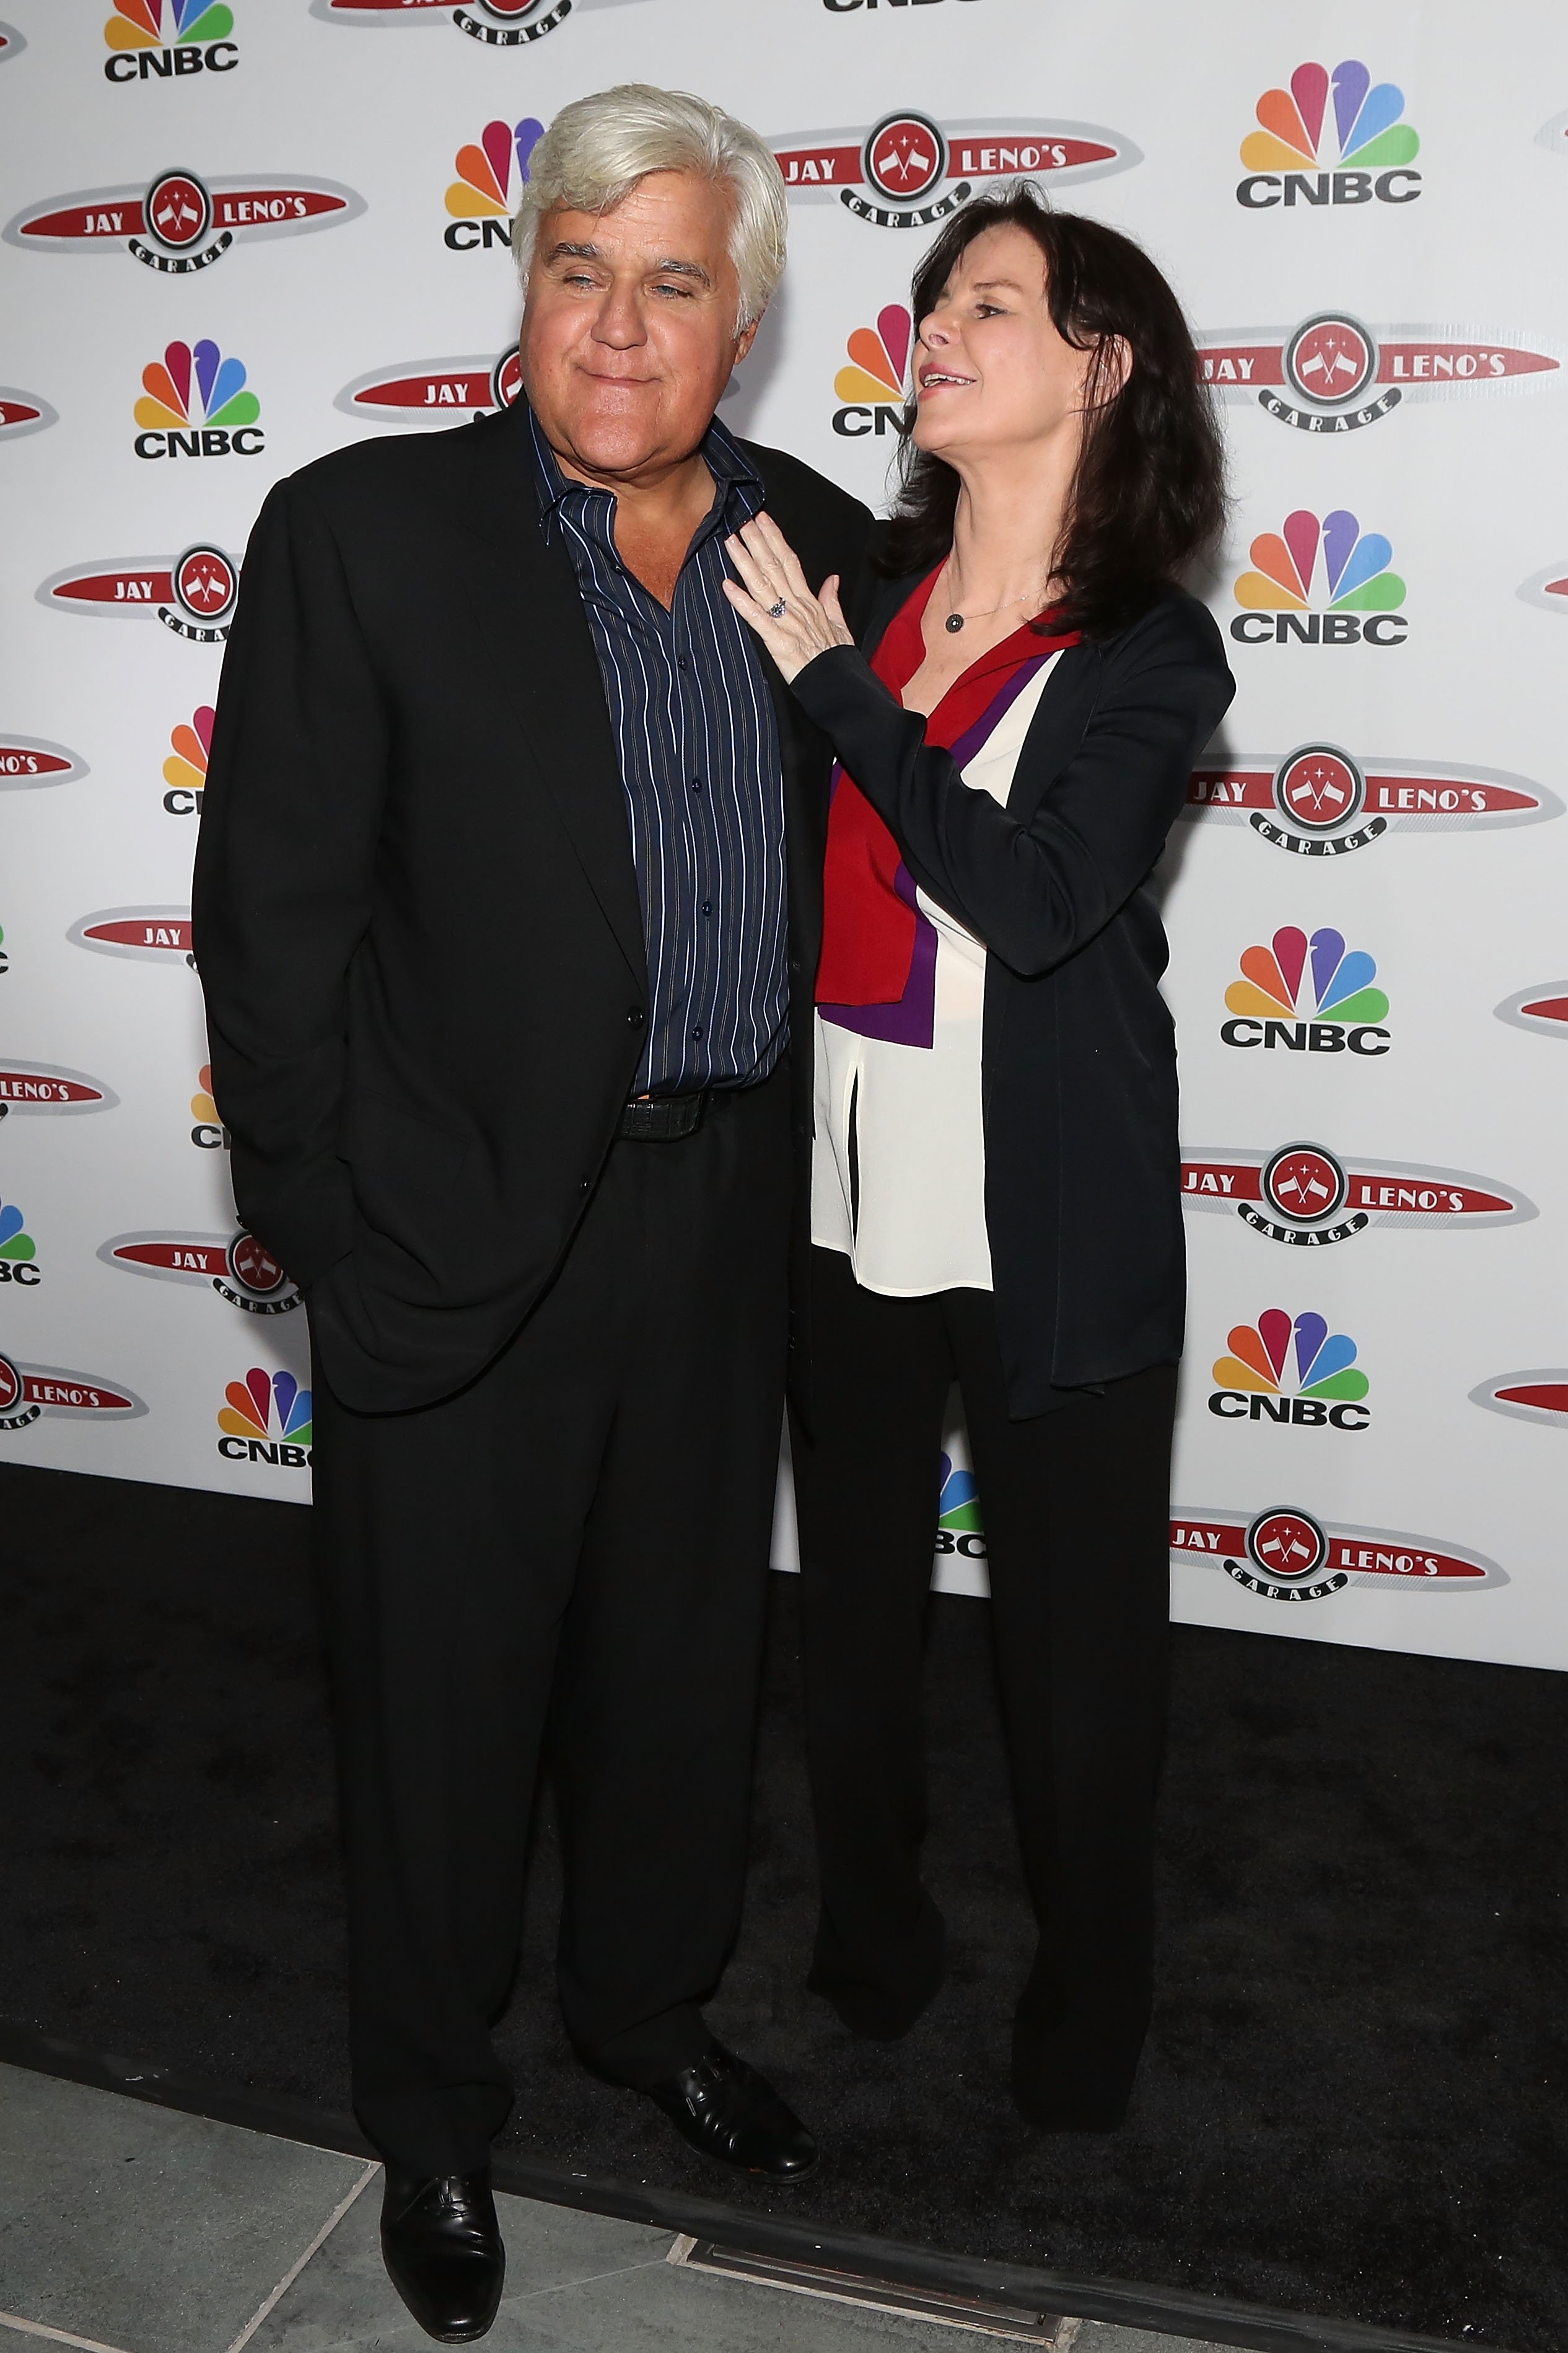 Jay and Mavis Leno at the premiere of "Jay Leno's Garage" on October 7, 2015, in New York City | Source: Getty Images